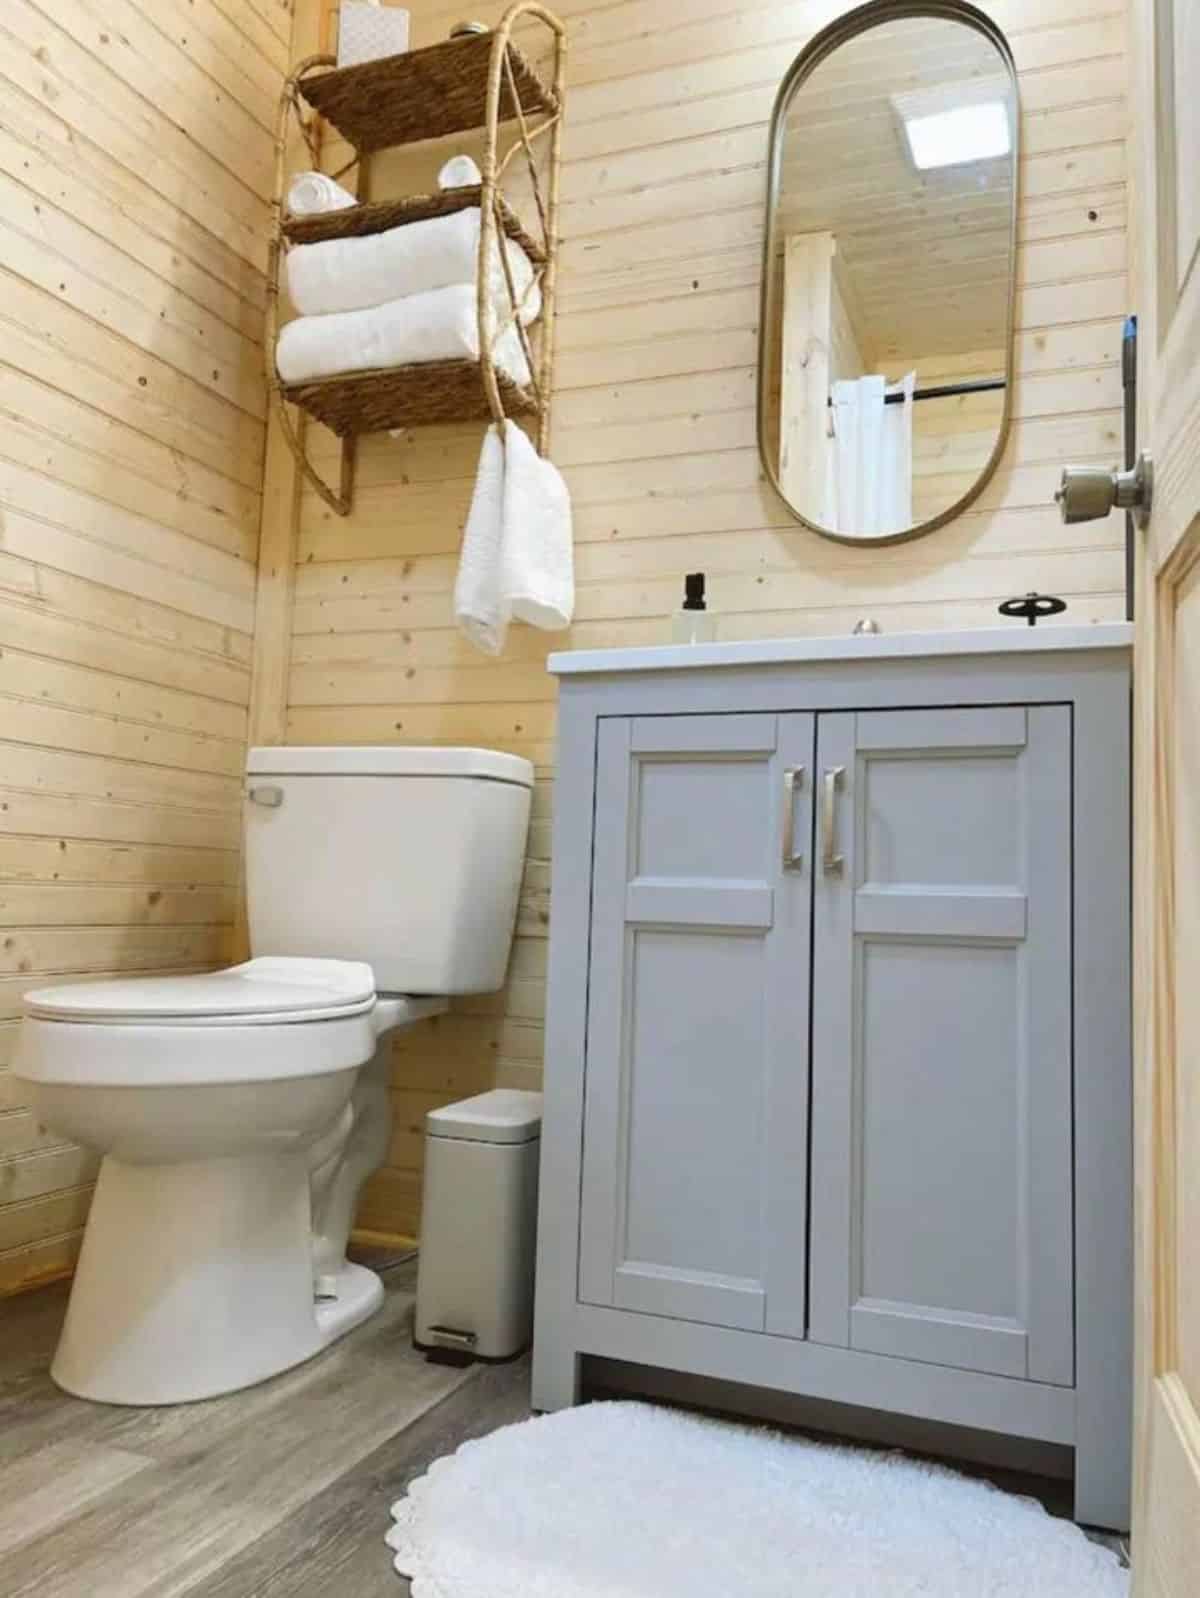 standard toilet, sink with vanity and mirror in bathroom of 24’ tiny home